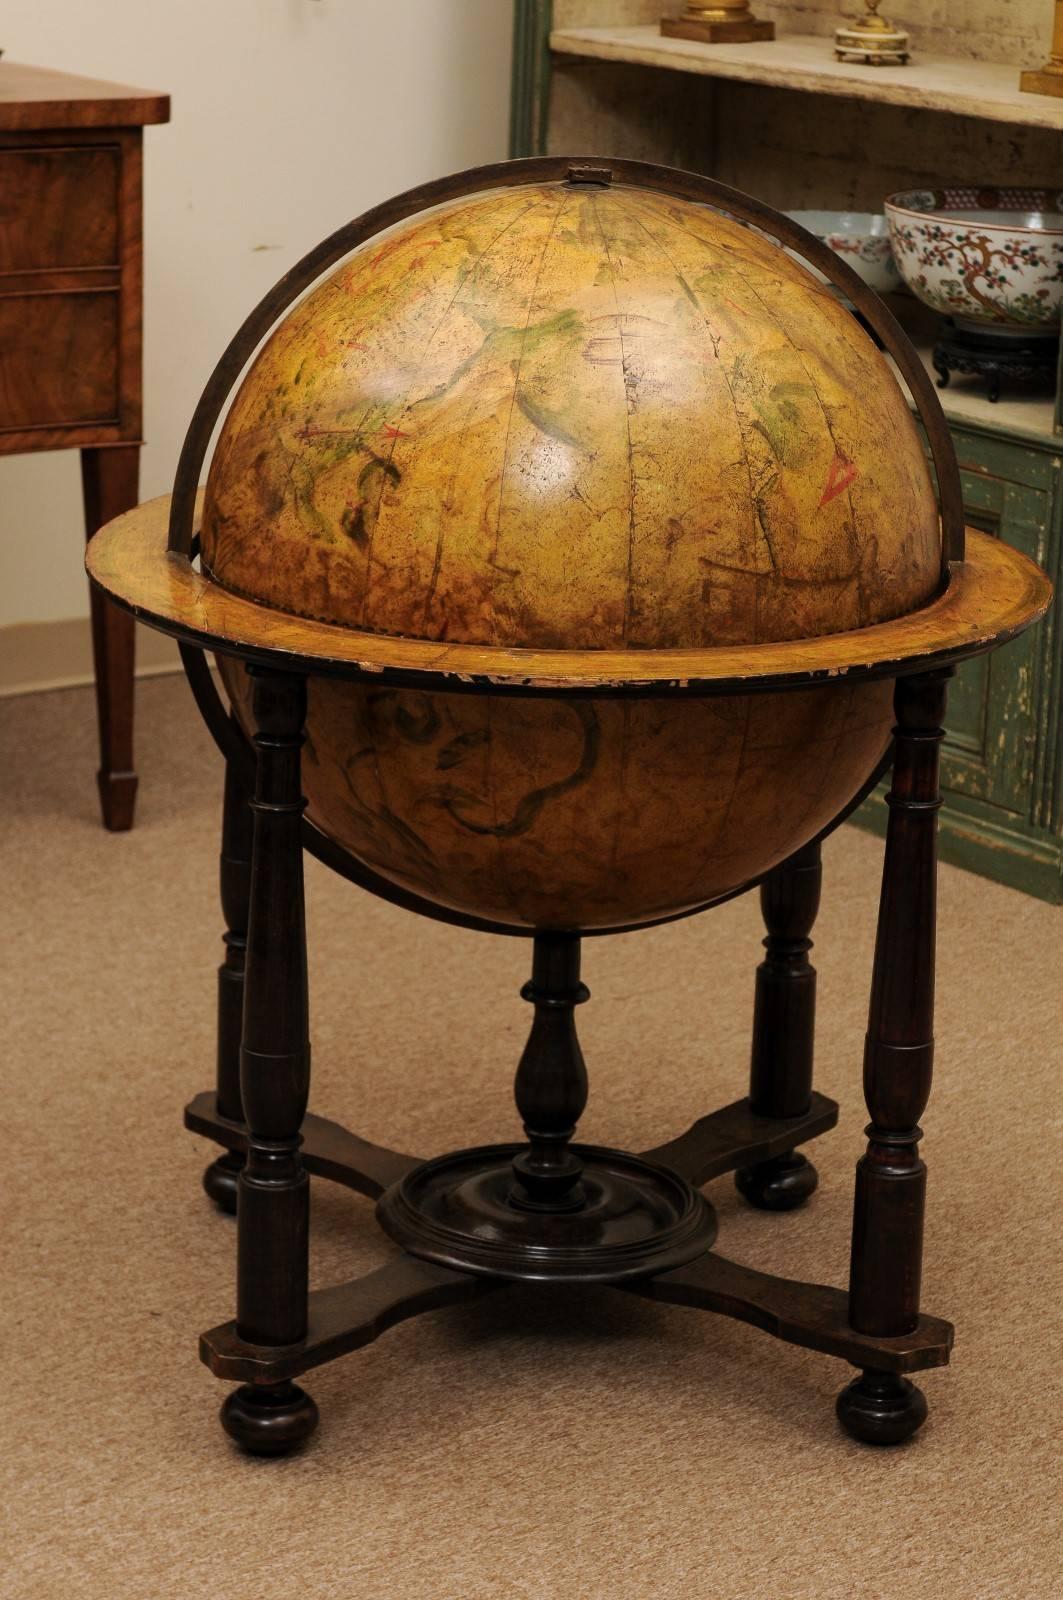 17th century Italian painted celestial globe mounted in custom wooden Stand with turned legs and bun feet (later, 19th century).